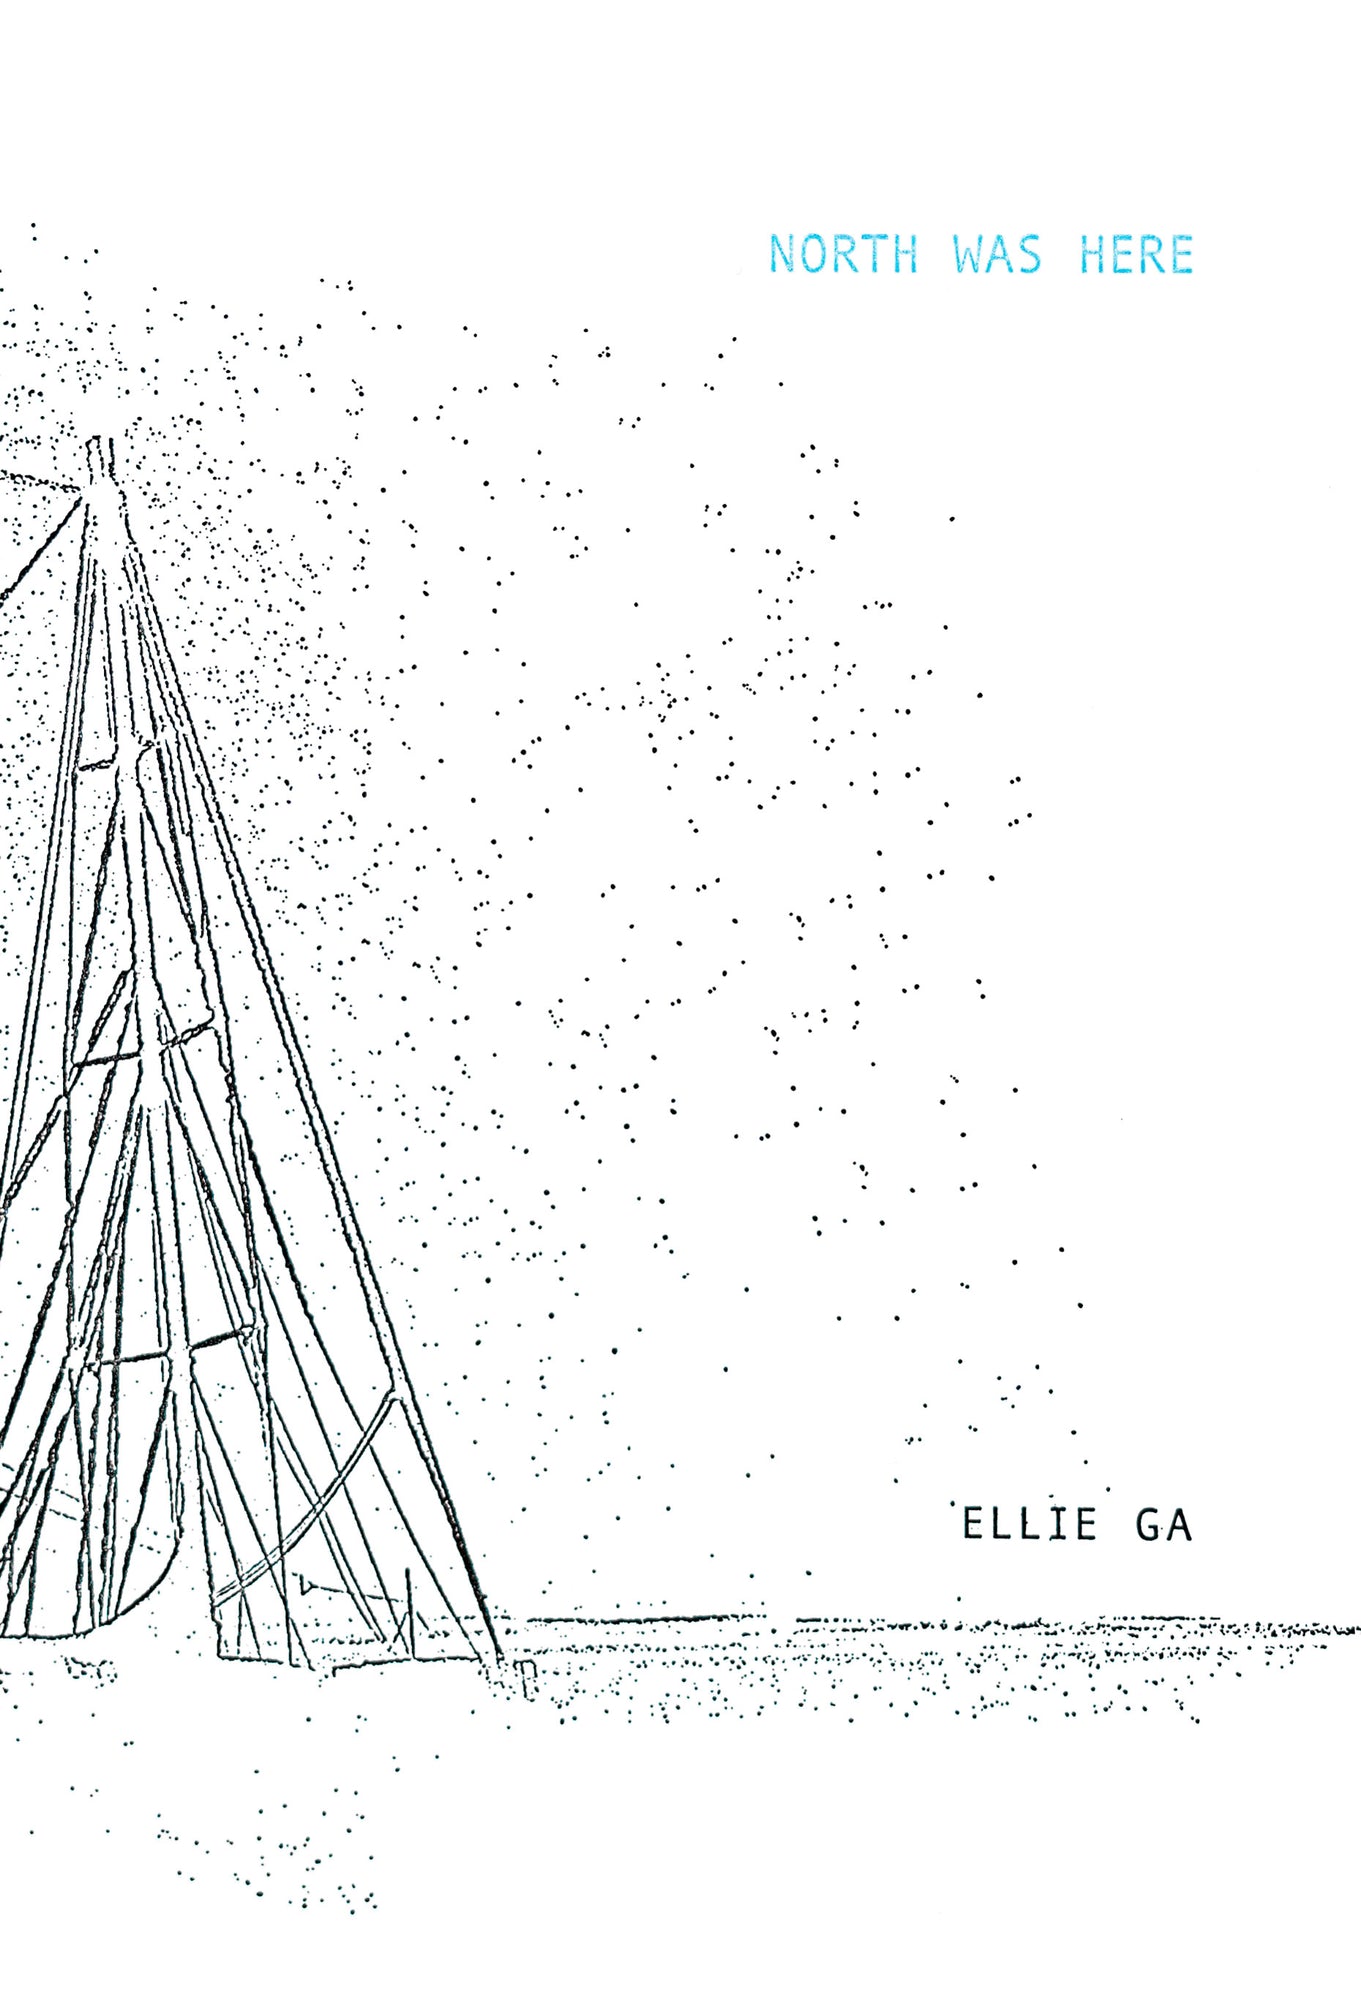 Book cover in white with the title North Was Here in light blue capitals in the upper right corner of the page. The author Ellie Ga is written in black capitals on the lower right corner of the page. The left side of the page contains a line drawing of an abstract construction from which dots emit and sprinkle all over the page. 